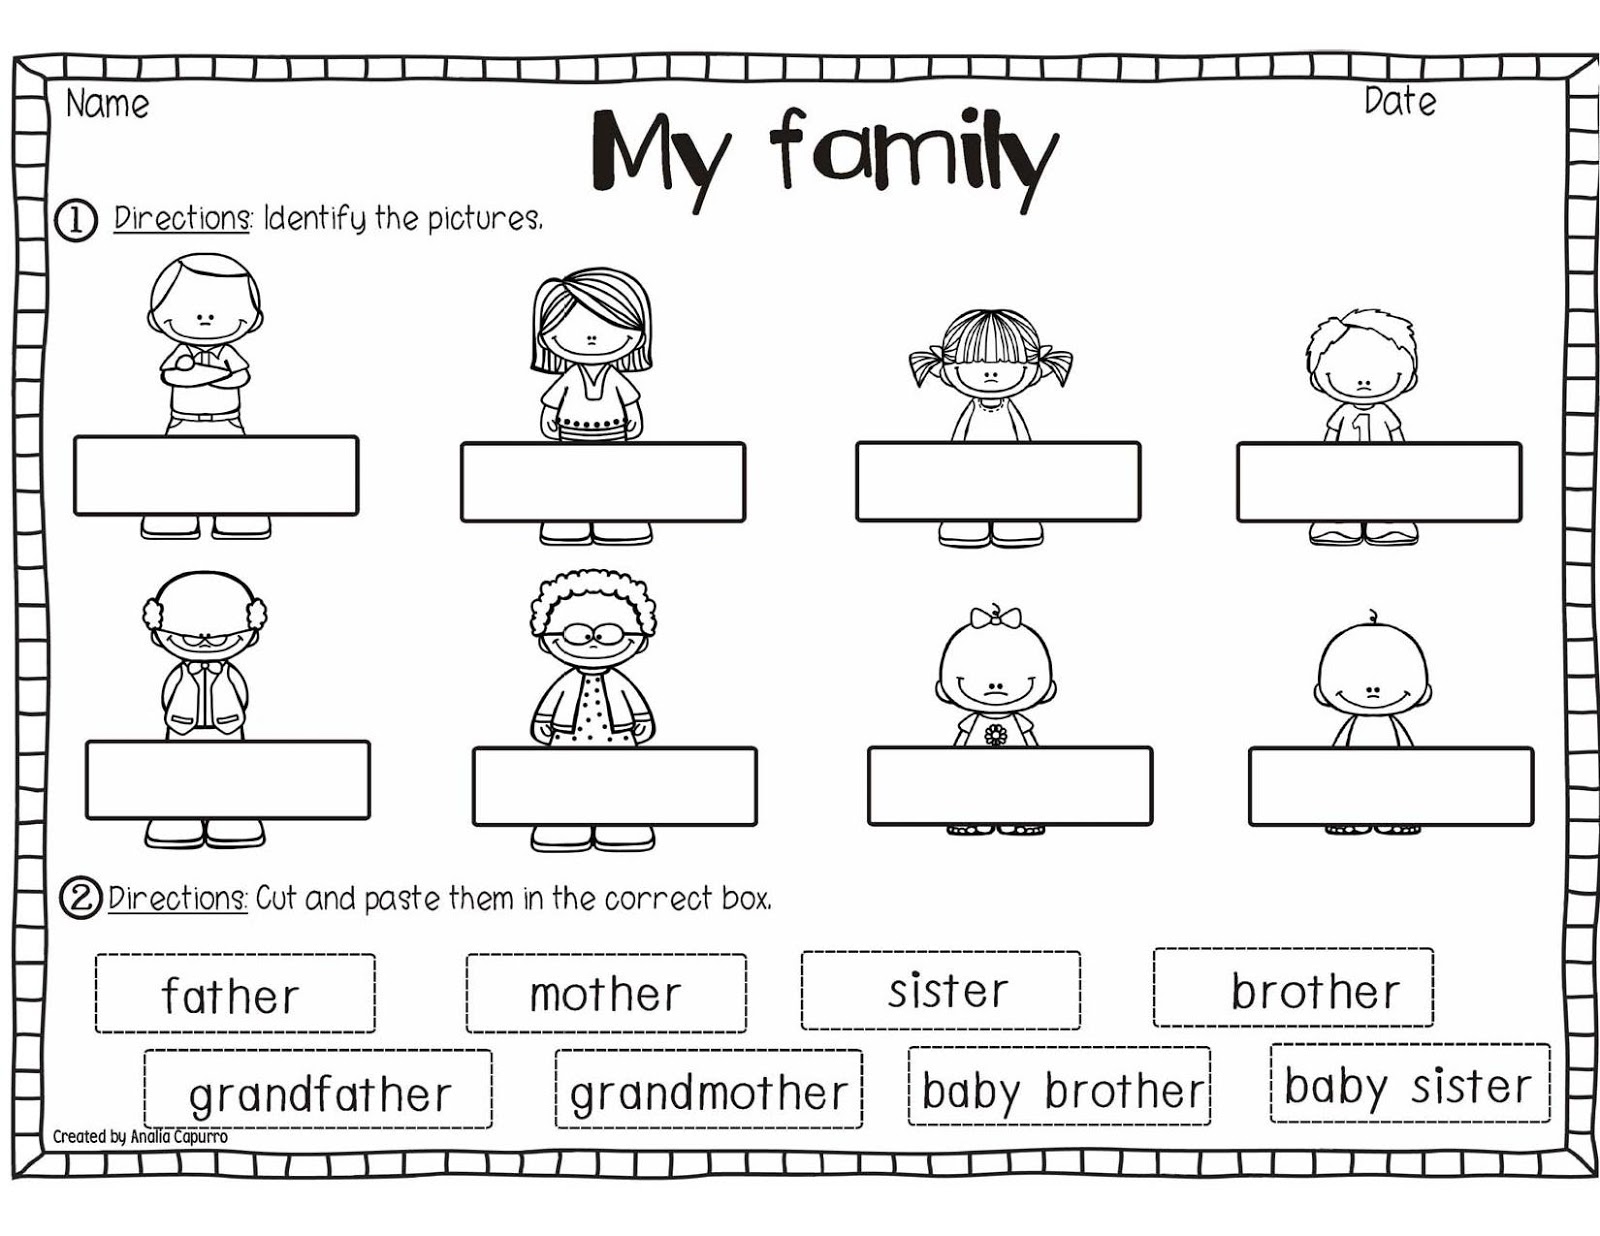 english-time-i-have-a-family